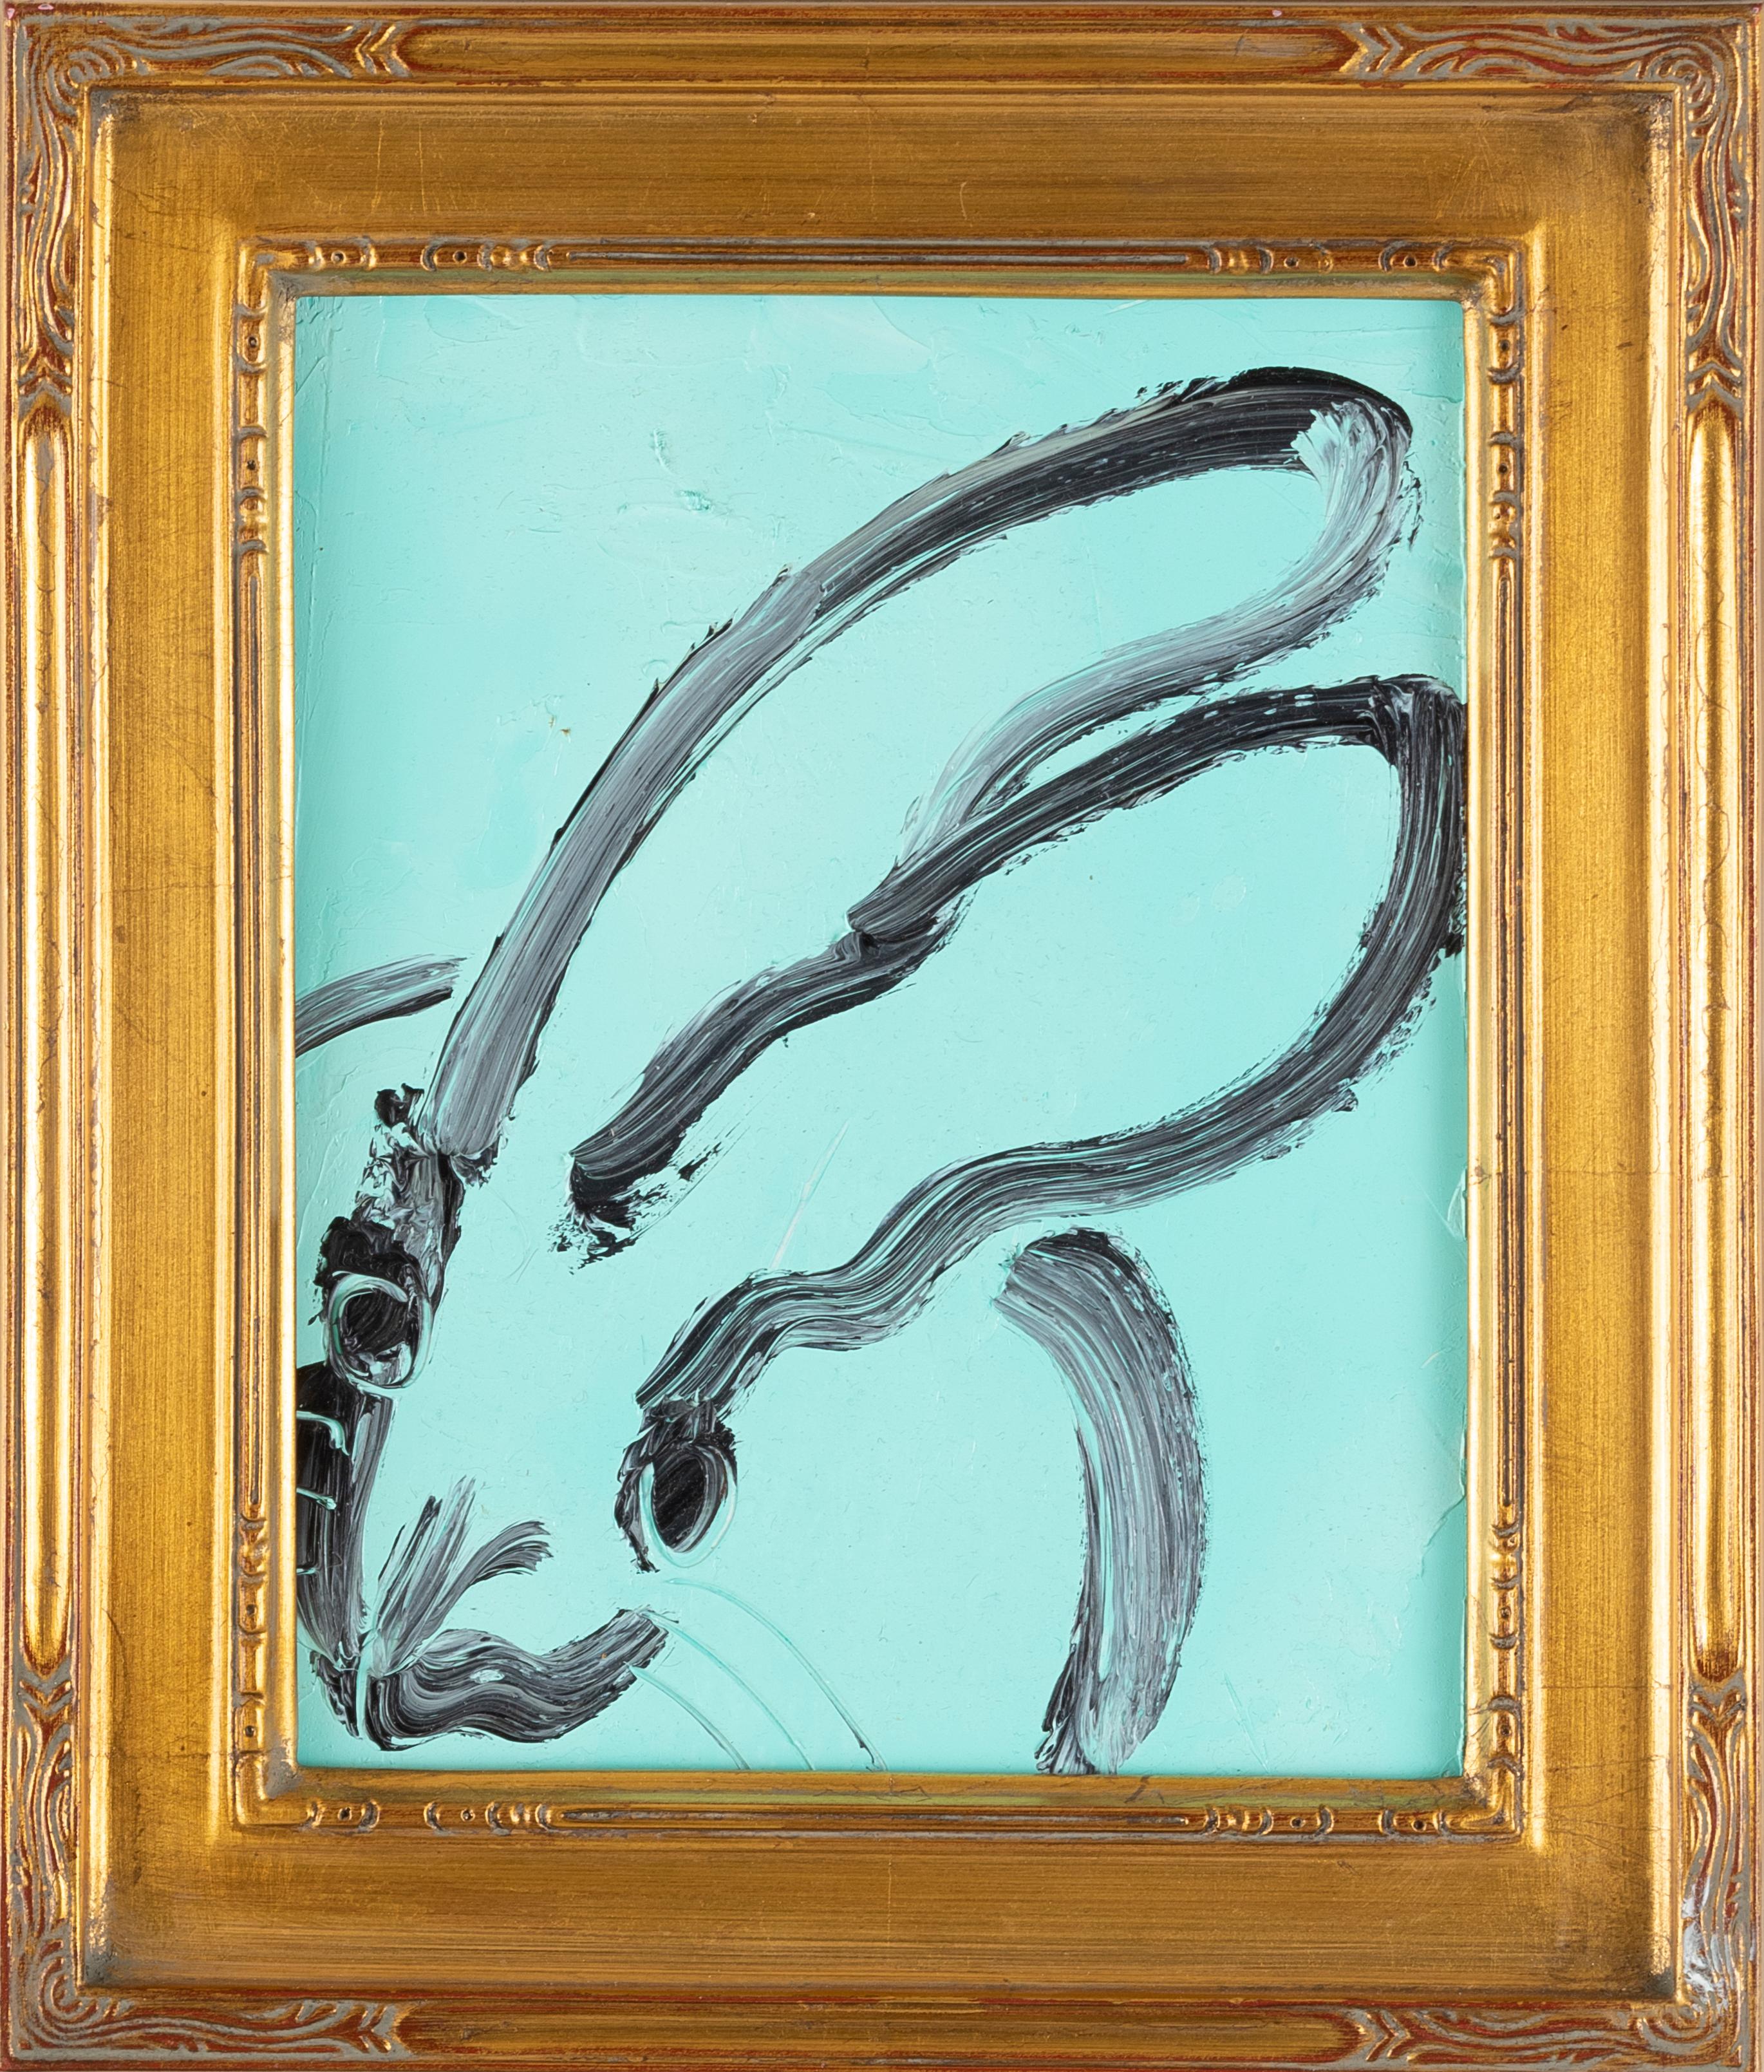 Hunt Slonem "Untitled" Seafoam Green Bunny
Black outlined bunny on seafoam green surface in gold frame

Unframed: 10 x 8 in.
Framed: 12 x 10 in.
*painting is framed*   

Hunt Slonem is a well-renowned American artist is known for his